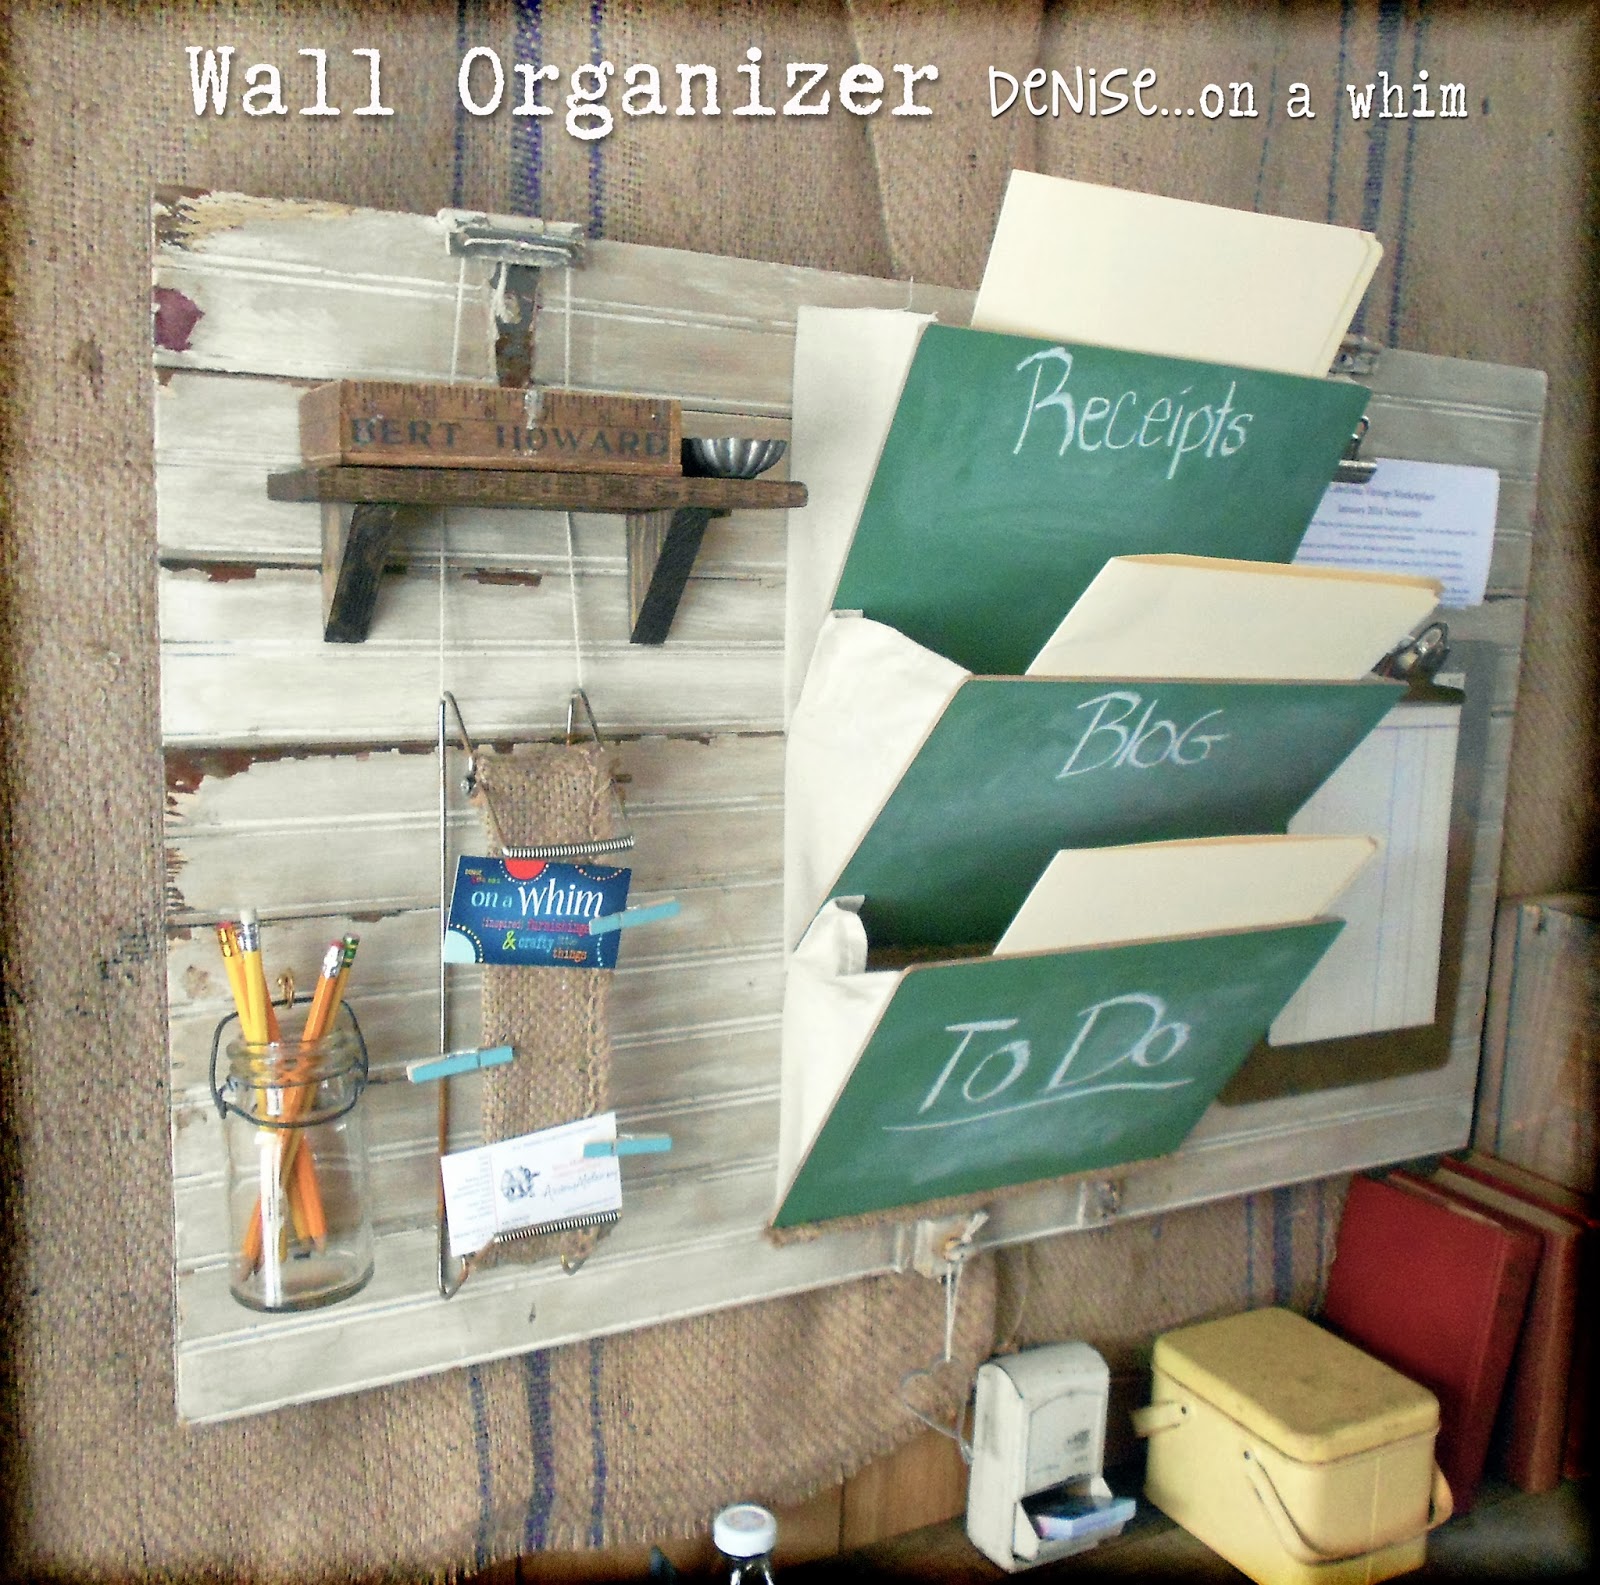 Wall Organizer Made from Junk and Thrifty Finds via http://deniseonawhim.blogspot.com